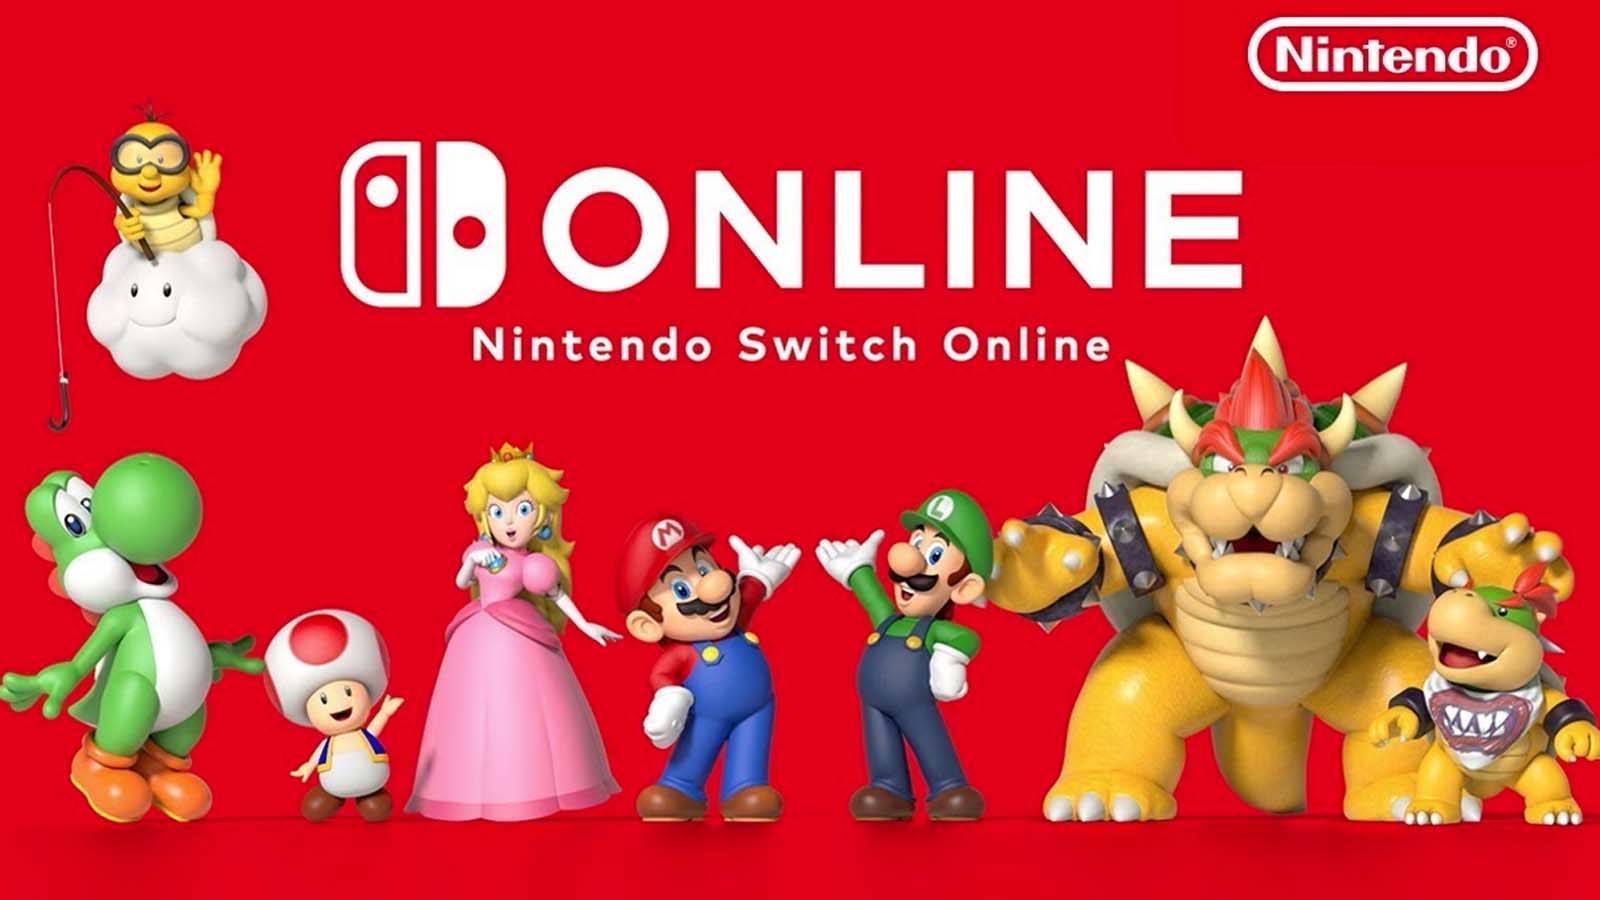 Nintendo Switch Online everything included